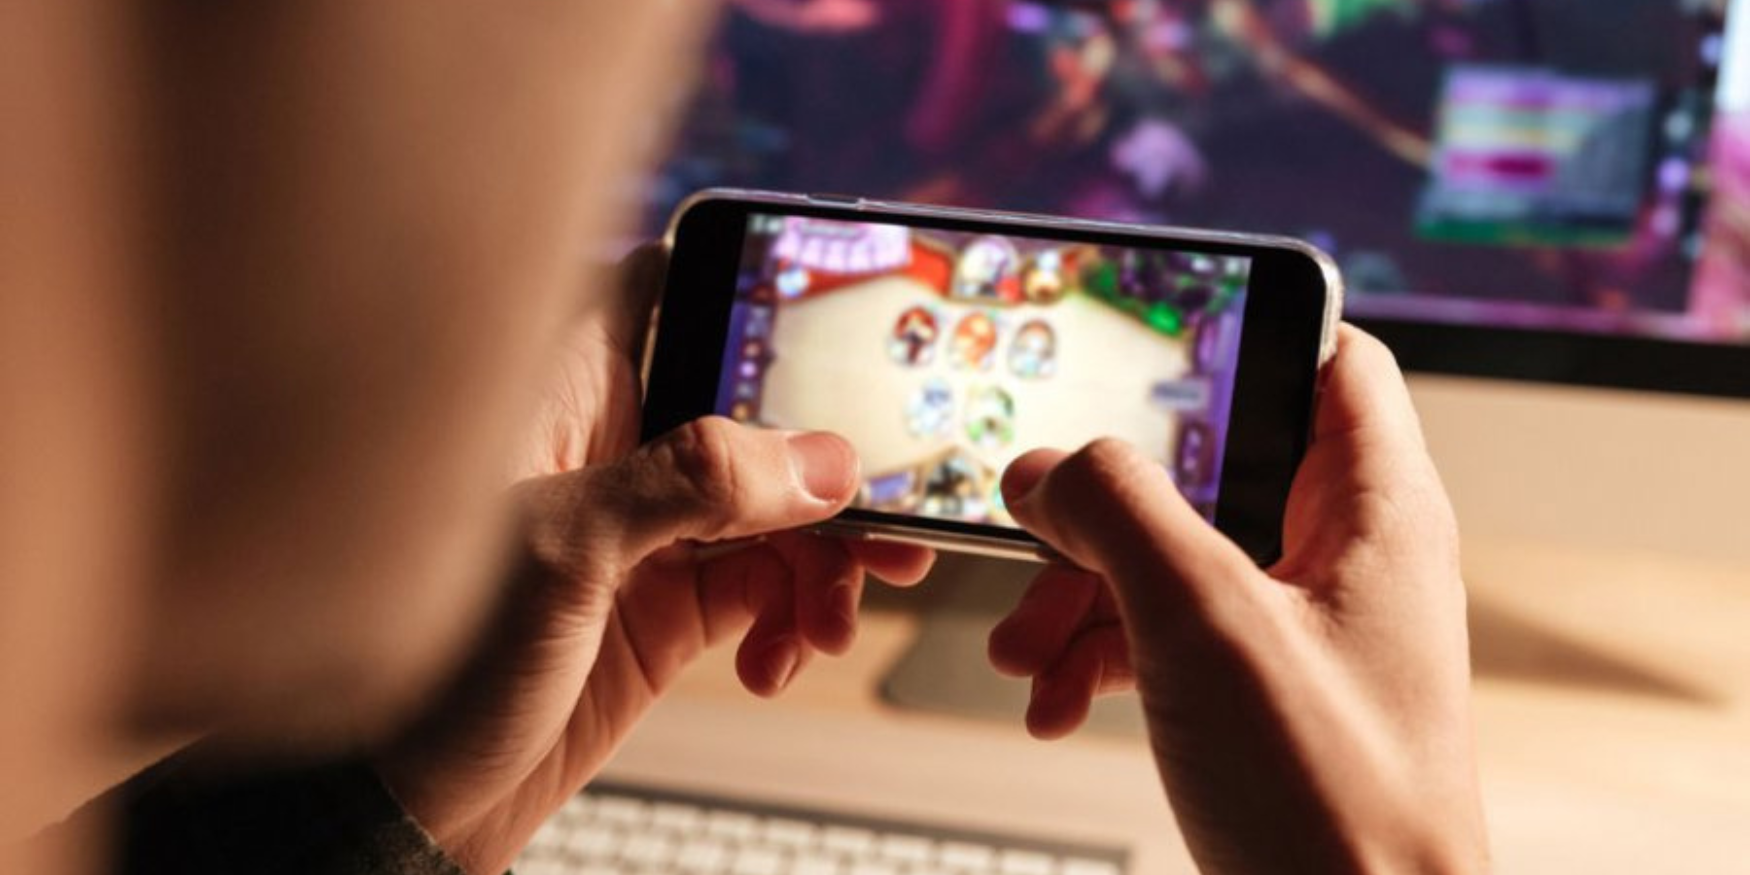 Mobile gaming market turned upside down by Netflix - Kindred for Business 